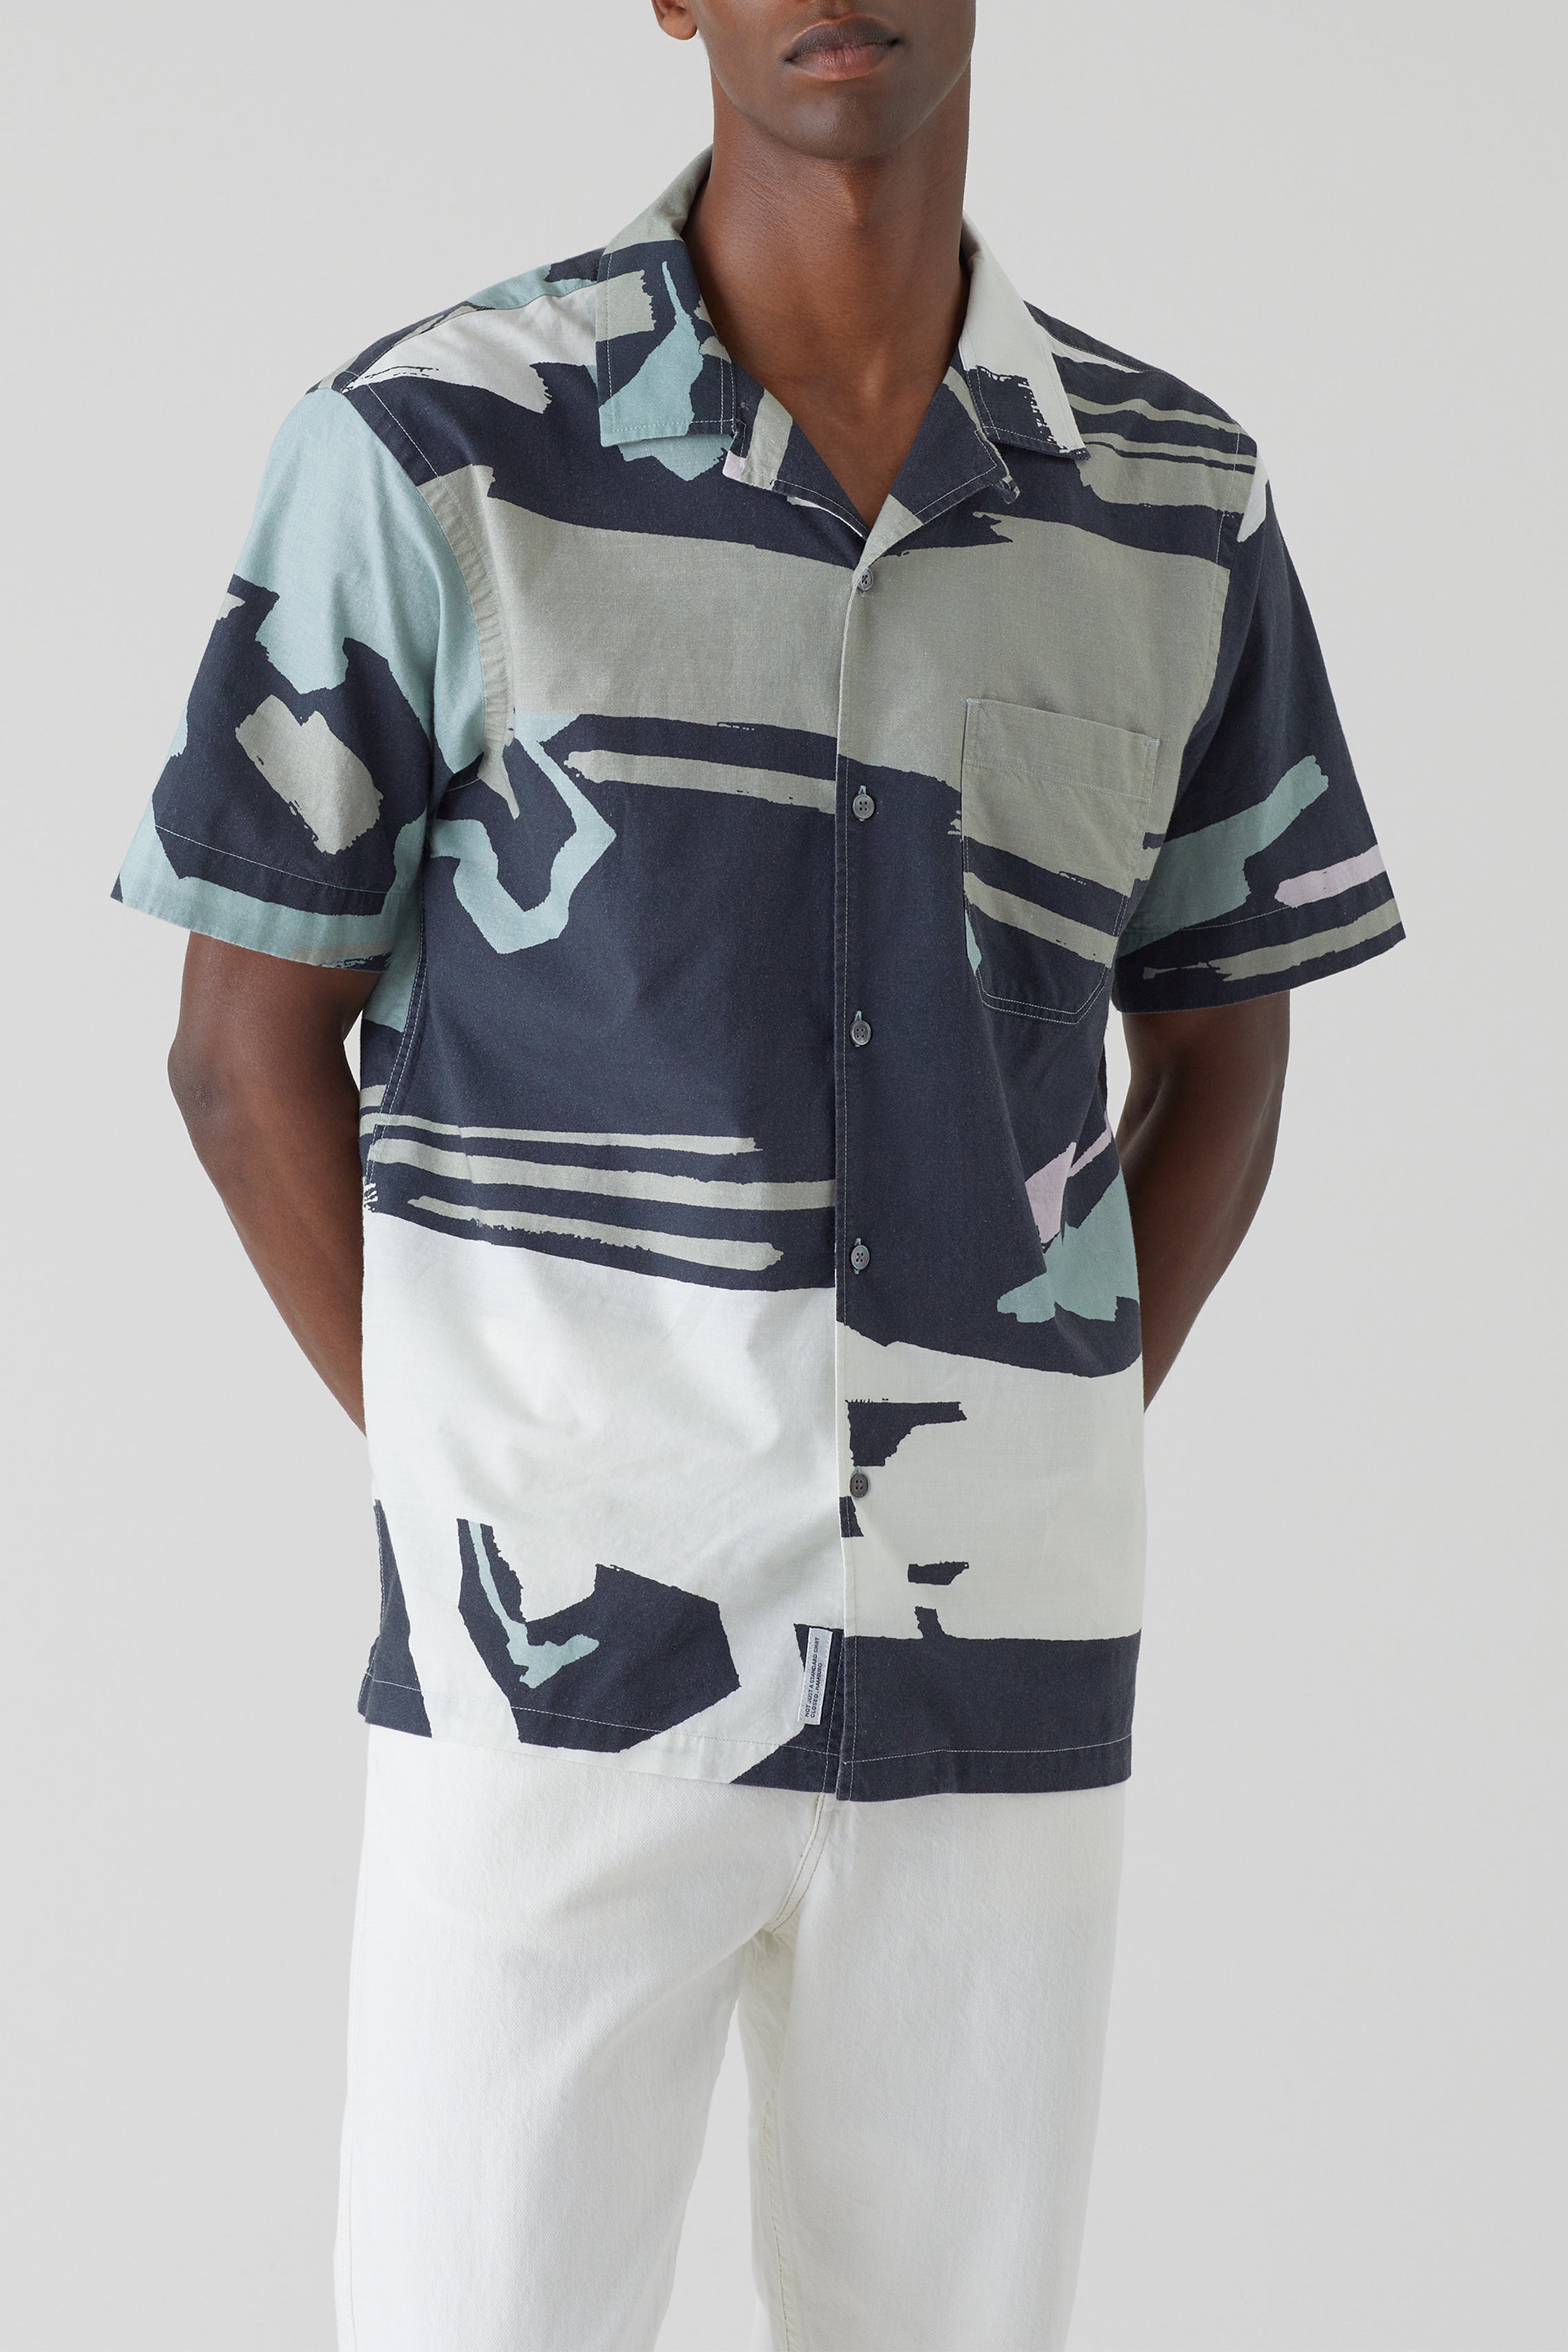 CLOSED-OUTLET-SALE-SHORT-SLEEVED-SHIRT-Shirts-ARCHIVE-COLLECTION.jpg